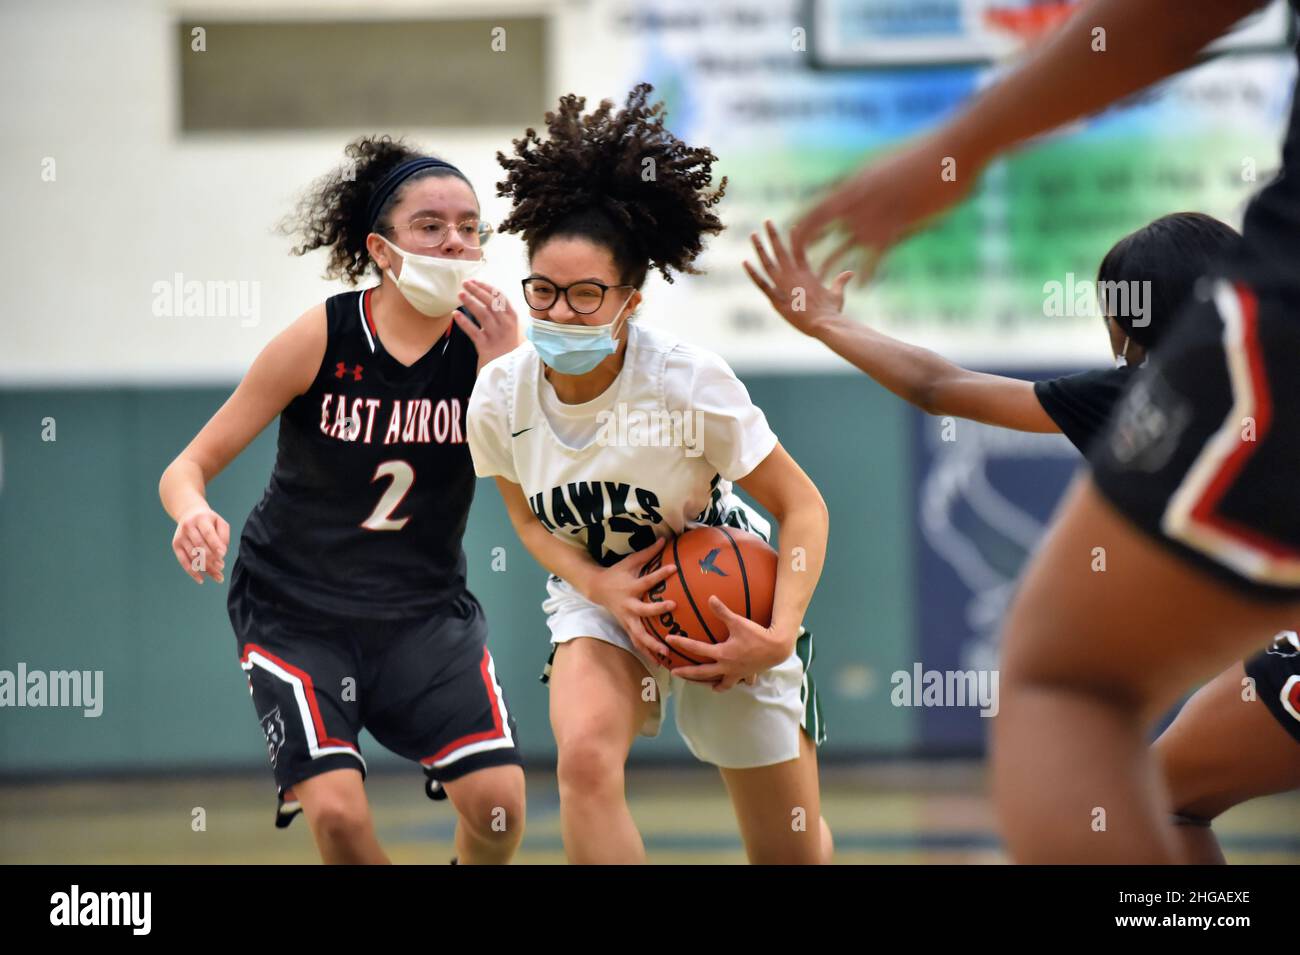 USA. Player striving to maintain control of the basketball while entering the paint after negotiating past an opponent. Stock Photo